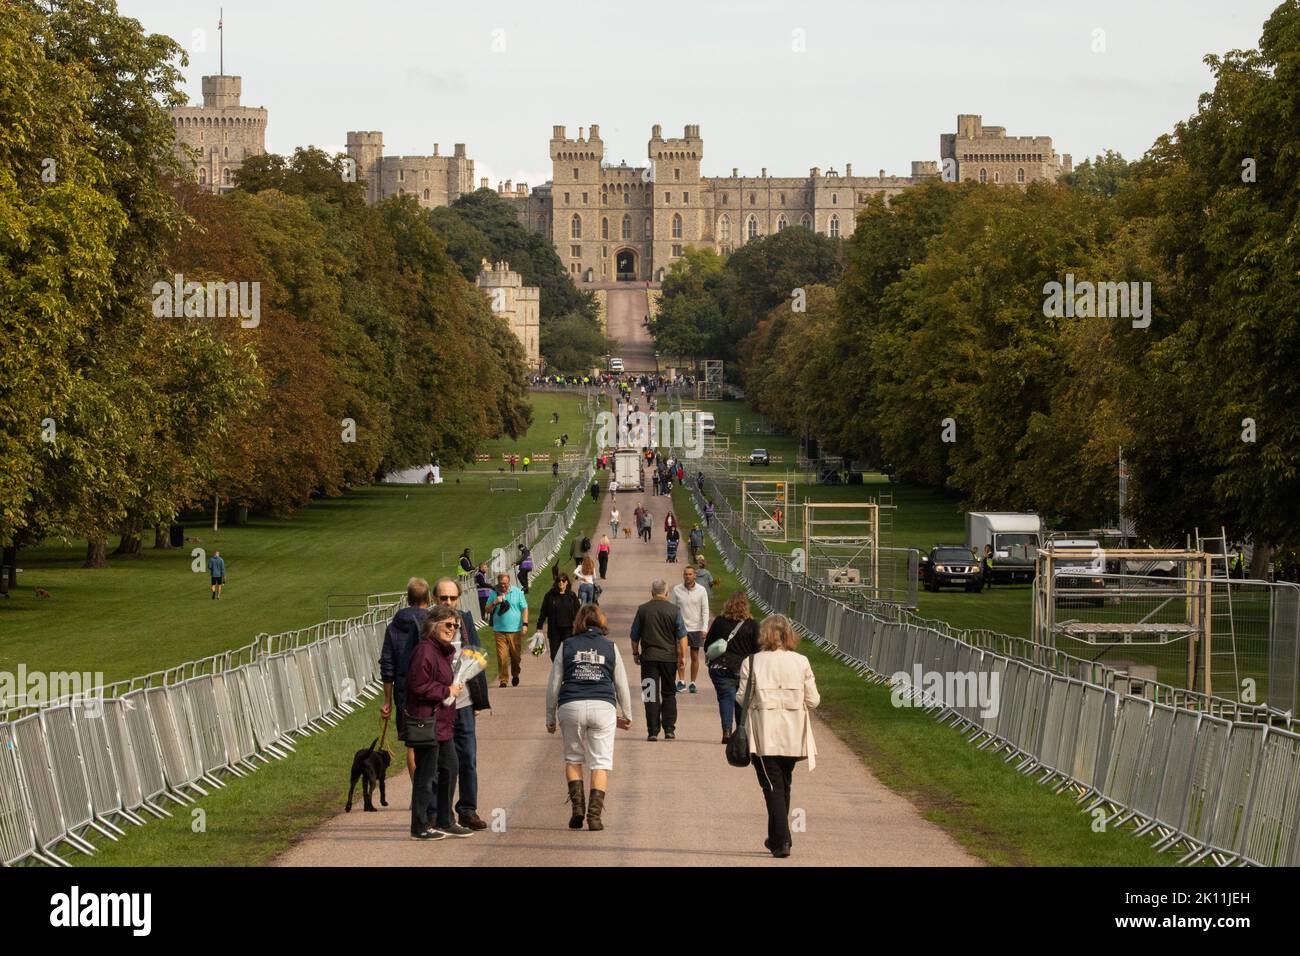 Windsor, UK. 14th September, 2022. Mourners proceed along the Long Walk in Windsor Great Park to lay floral tributes to Queen Elizabeth II outside Windsor Castle. Queen Elizabeth II, the UK's longest-serving monarch, died at Balmoral aged 96 on 8th September after a reign lasting 70 years and will be buried in the King George VI memorial chapel in Windsor following a state funeral in Westminster Abbey on 19th September. Credit: Mark Kerrison/Alamy Live News Stock Photo